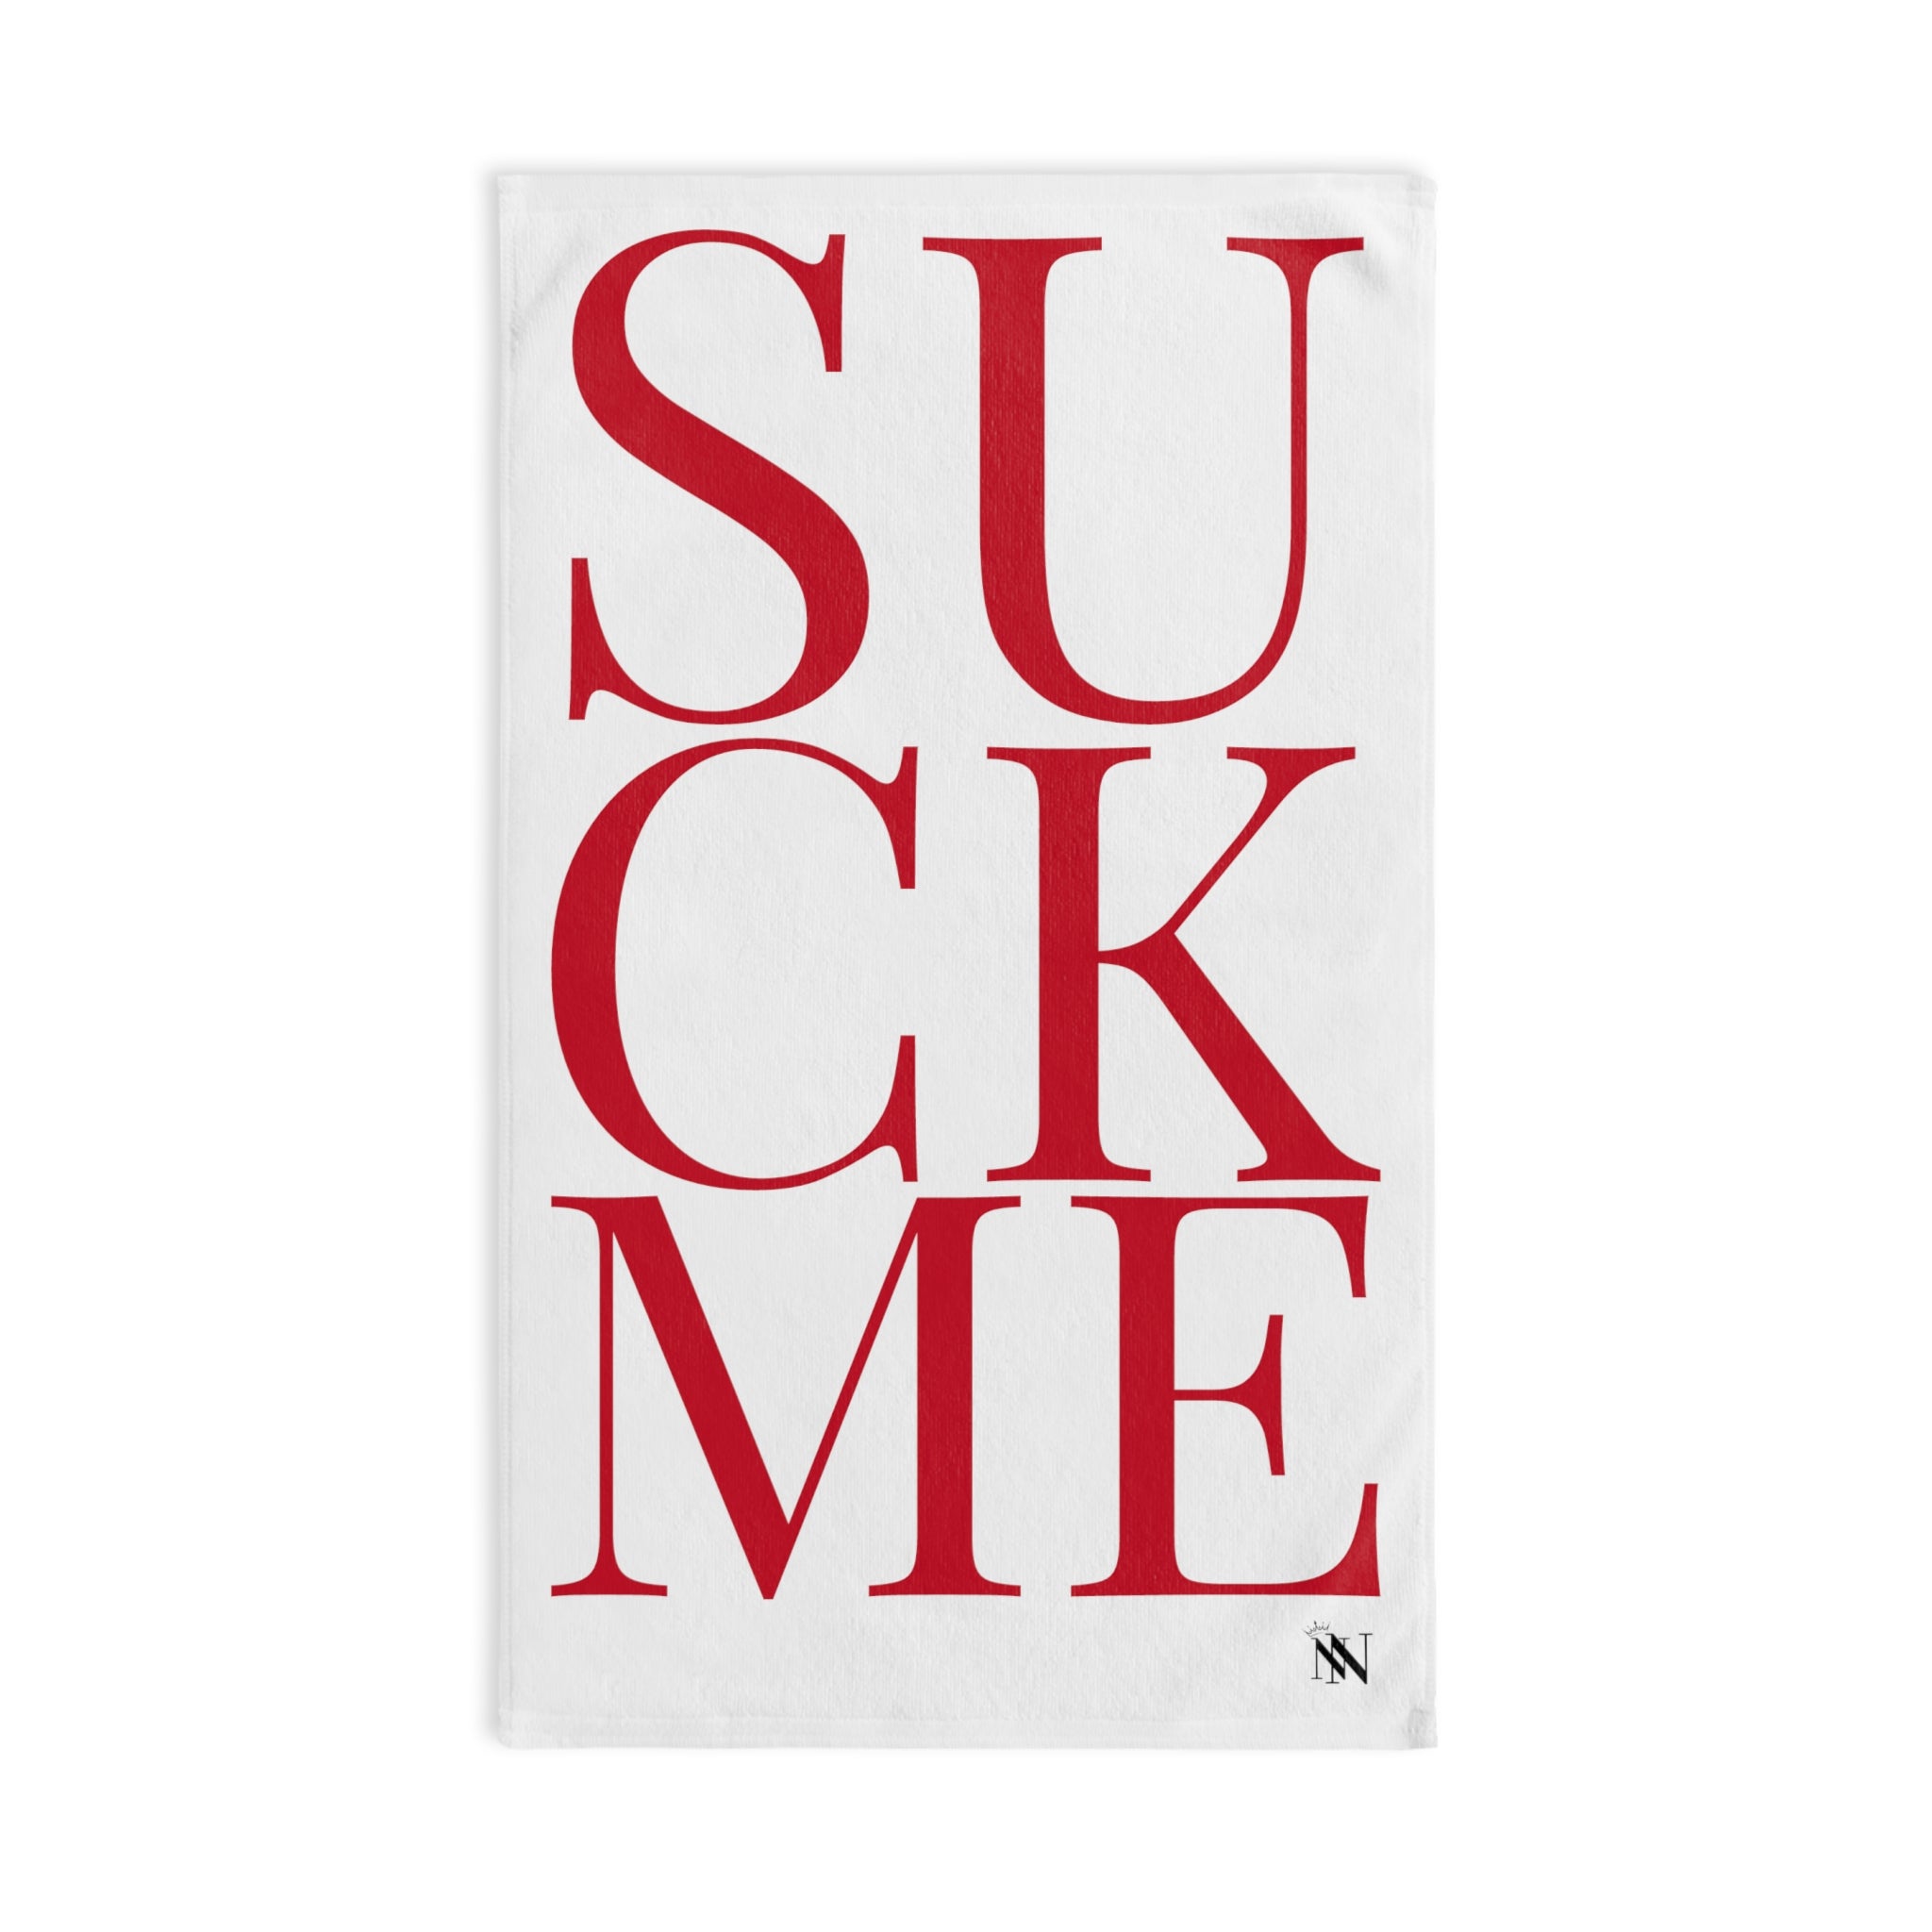 Suck Me Red White | Funny Gifts for Men - Gifts for Him - Birthday Gifts for Men, Him, Her, Husband, Boyfriend, Girlfriend, New Couple Gifts, Fathers & Valentines Day Gifts, Christmas Gifts NECTAR NAPKINS